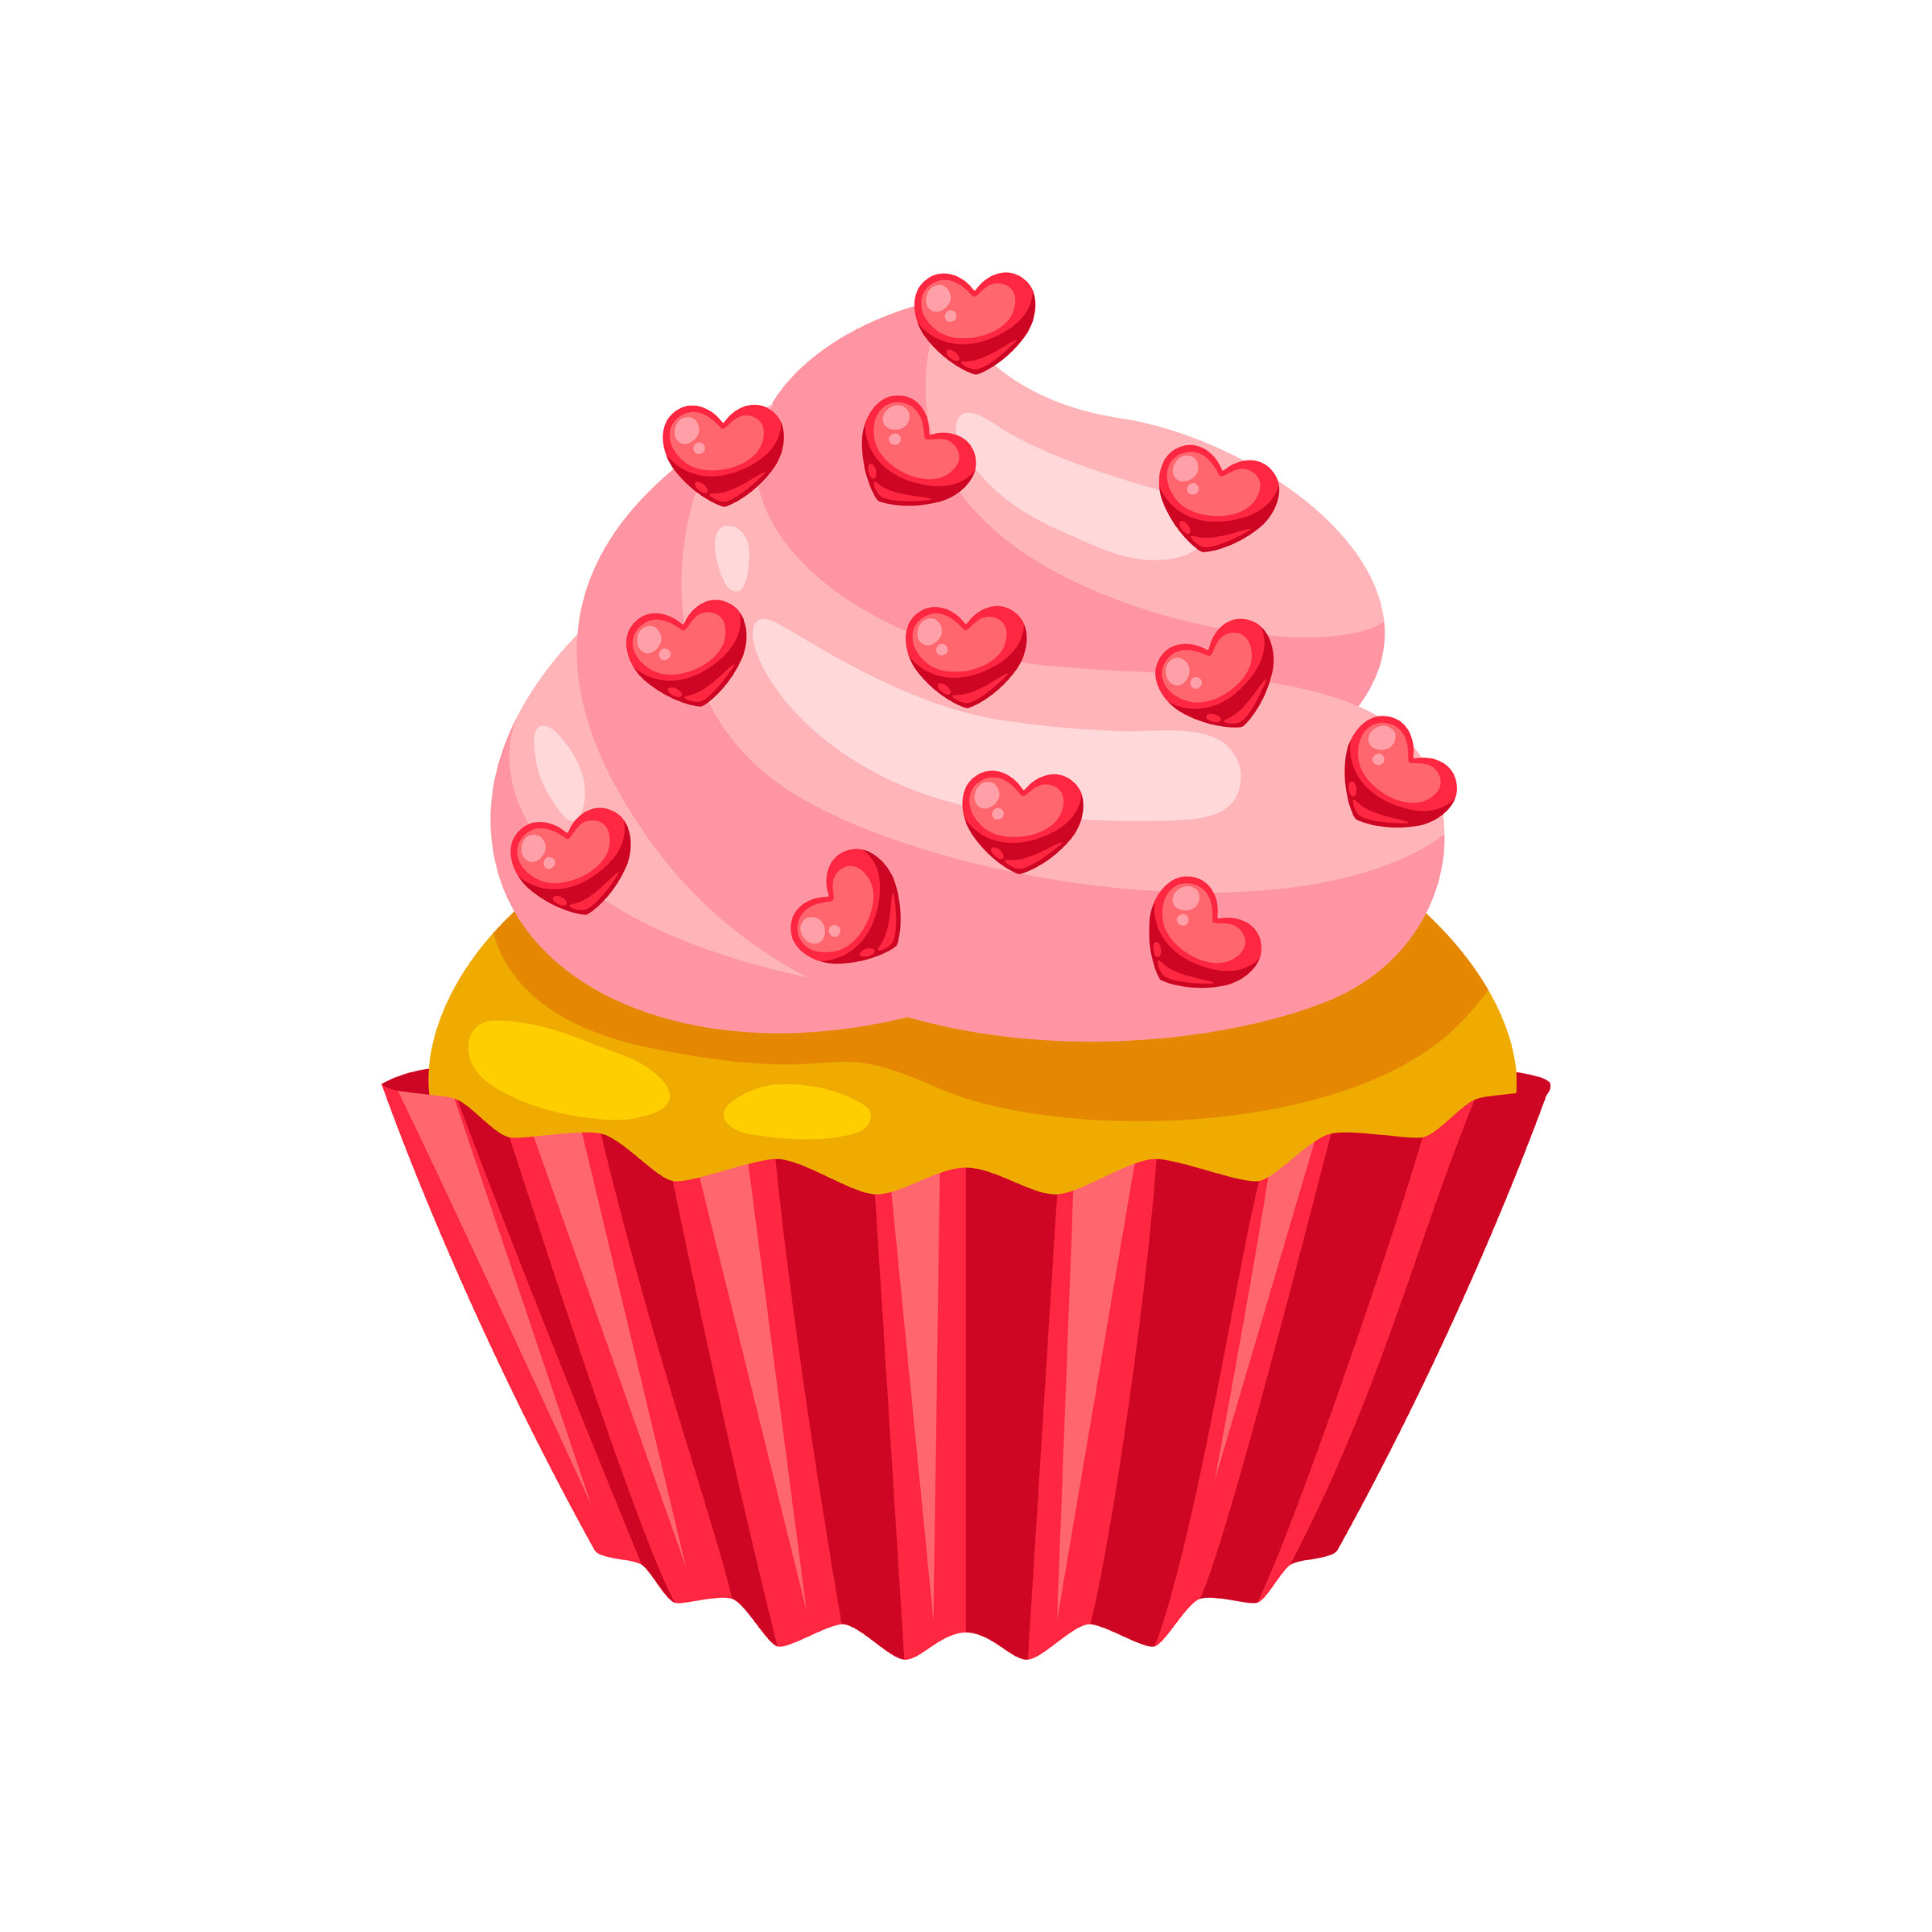 Cupcake with pink frosting and  heart shaped sprinkles.